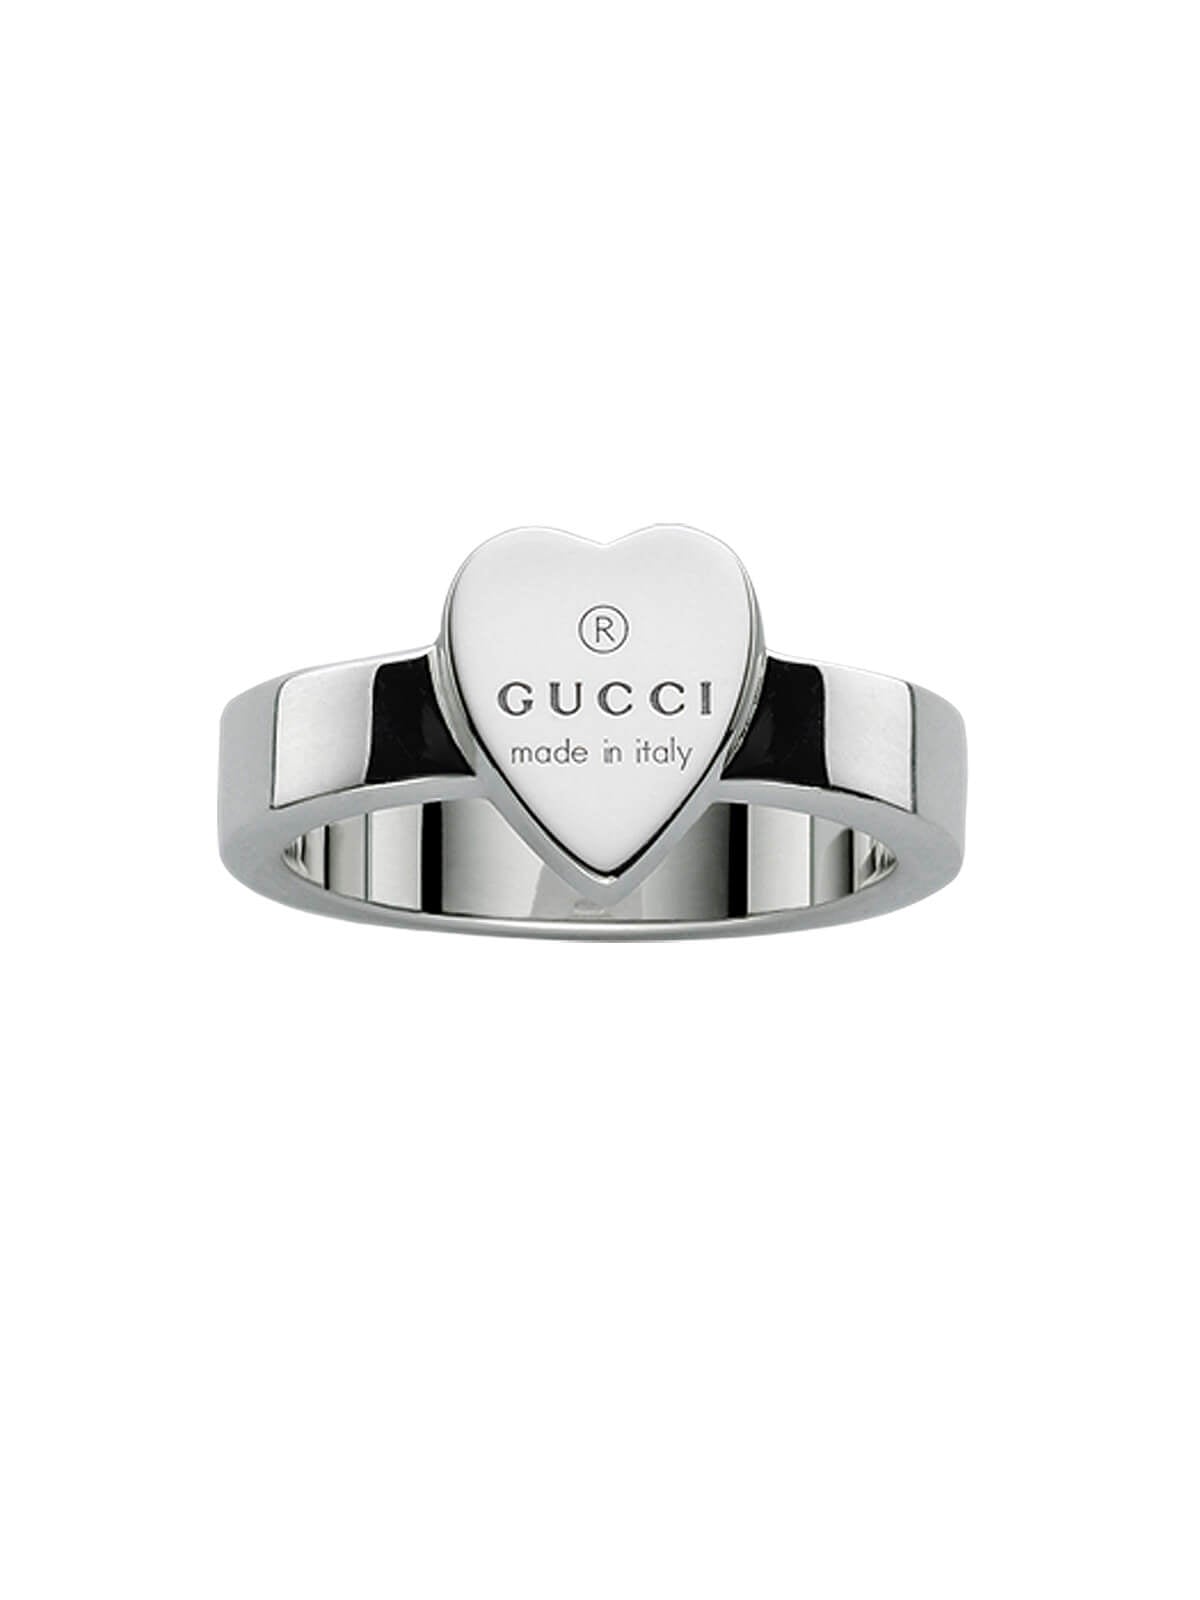 Gucci Trademark Ring in Silver - Size 14